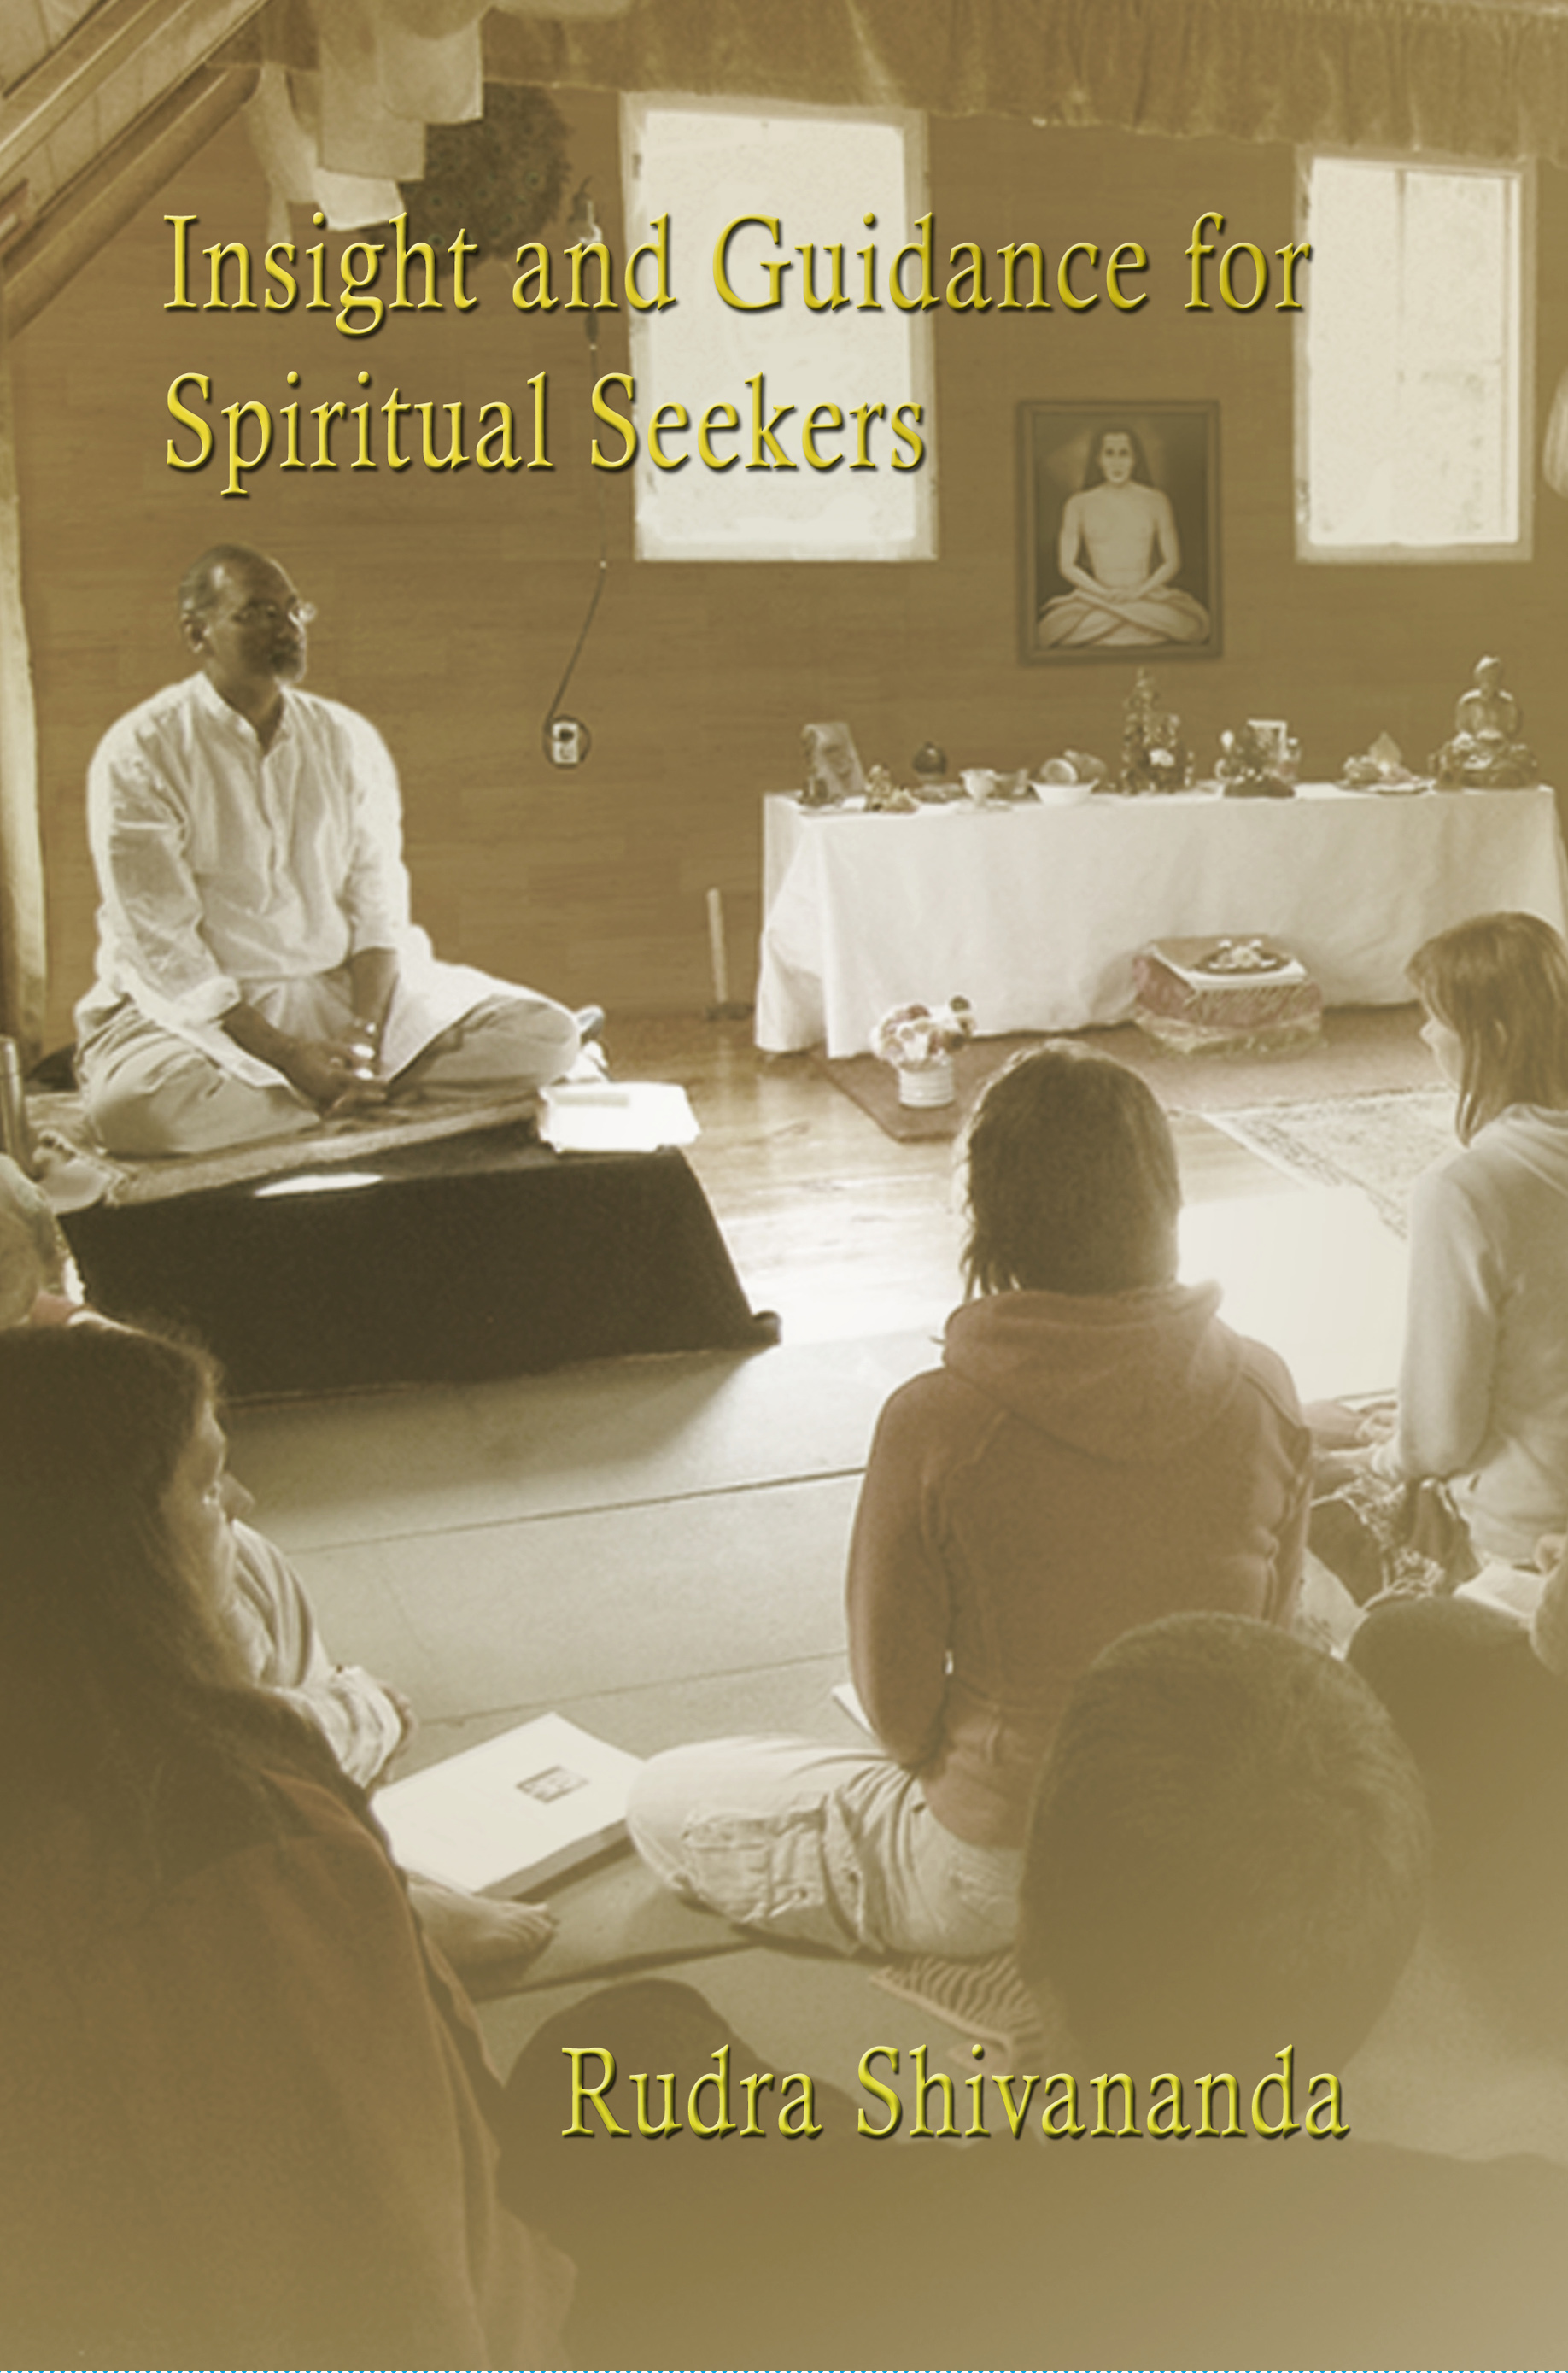 Insight and Guidance for Spiritual Seekers (pdf download)